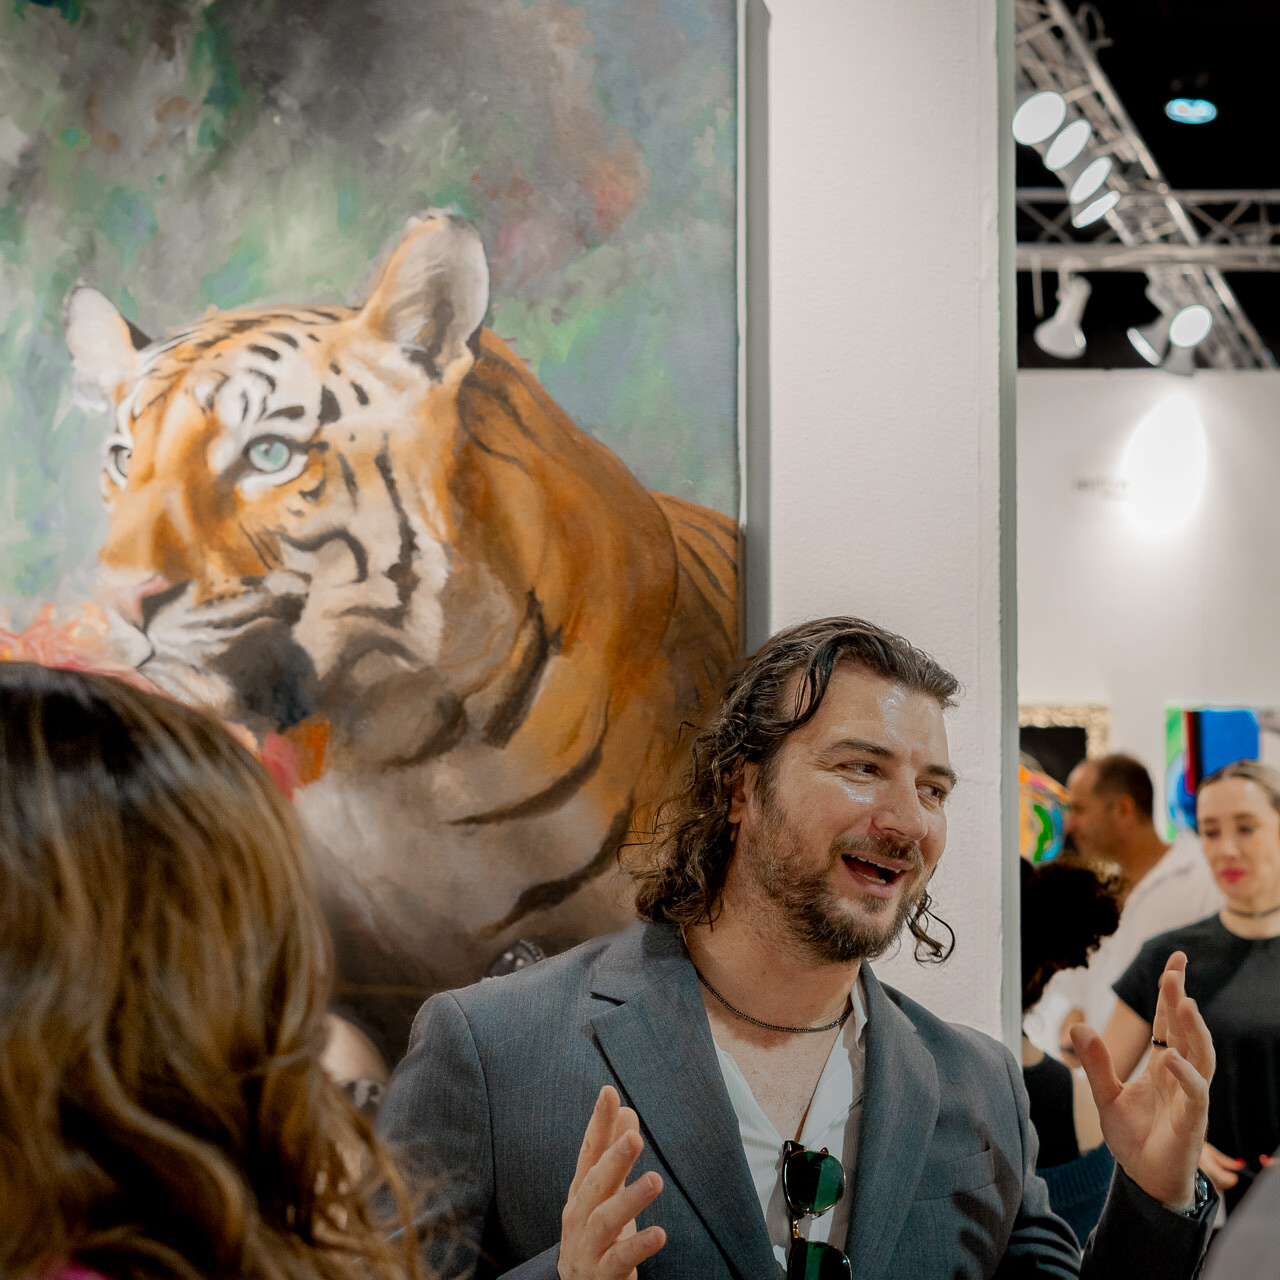 Alex Righetto is seen passionately discussing his artwork 'The Guardian' with art week attendees, with the vivid painting serving as a backdrop.